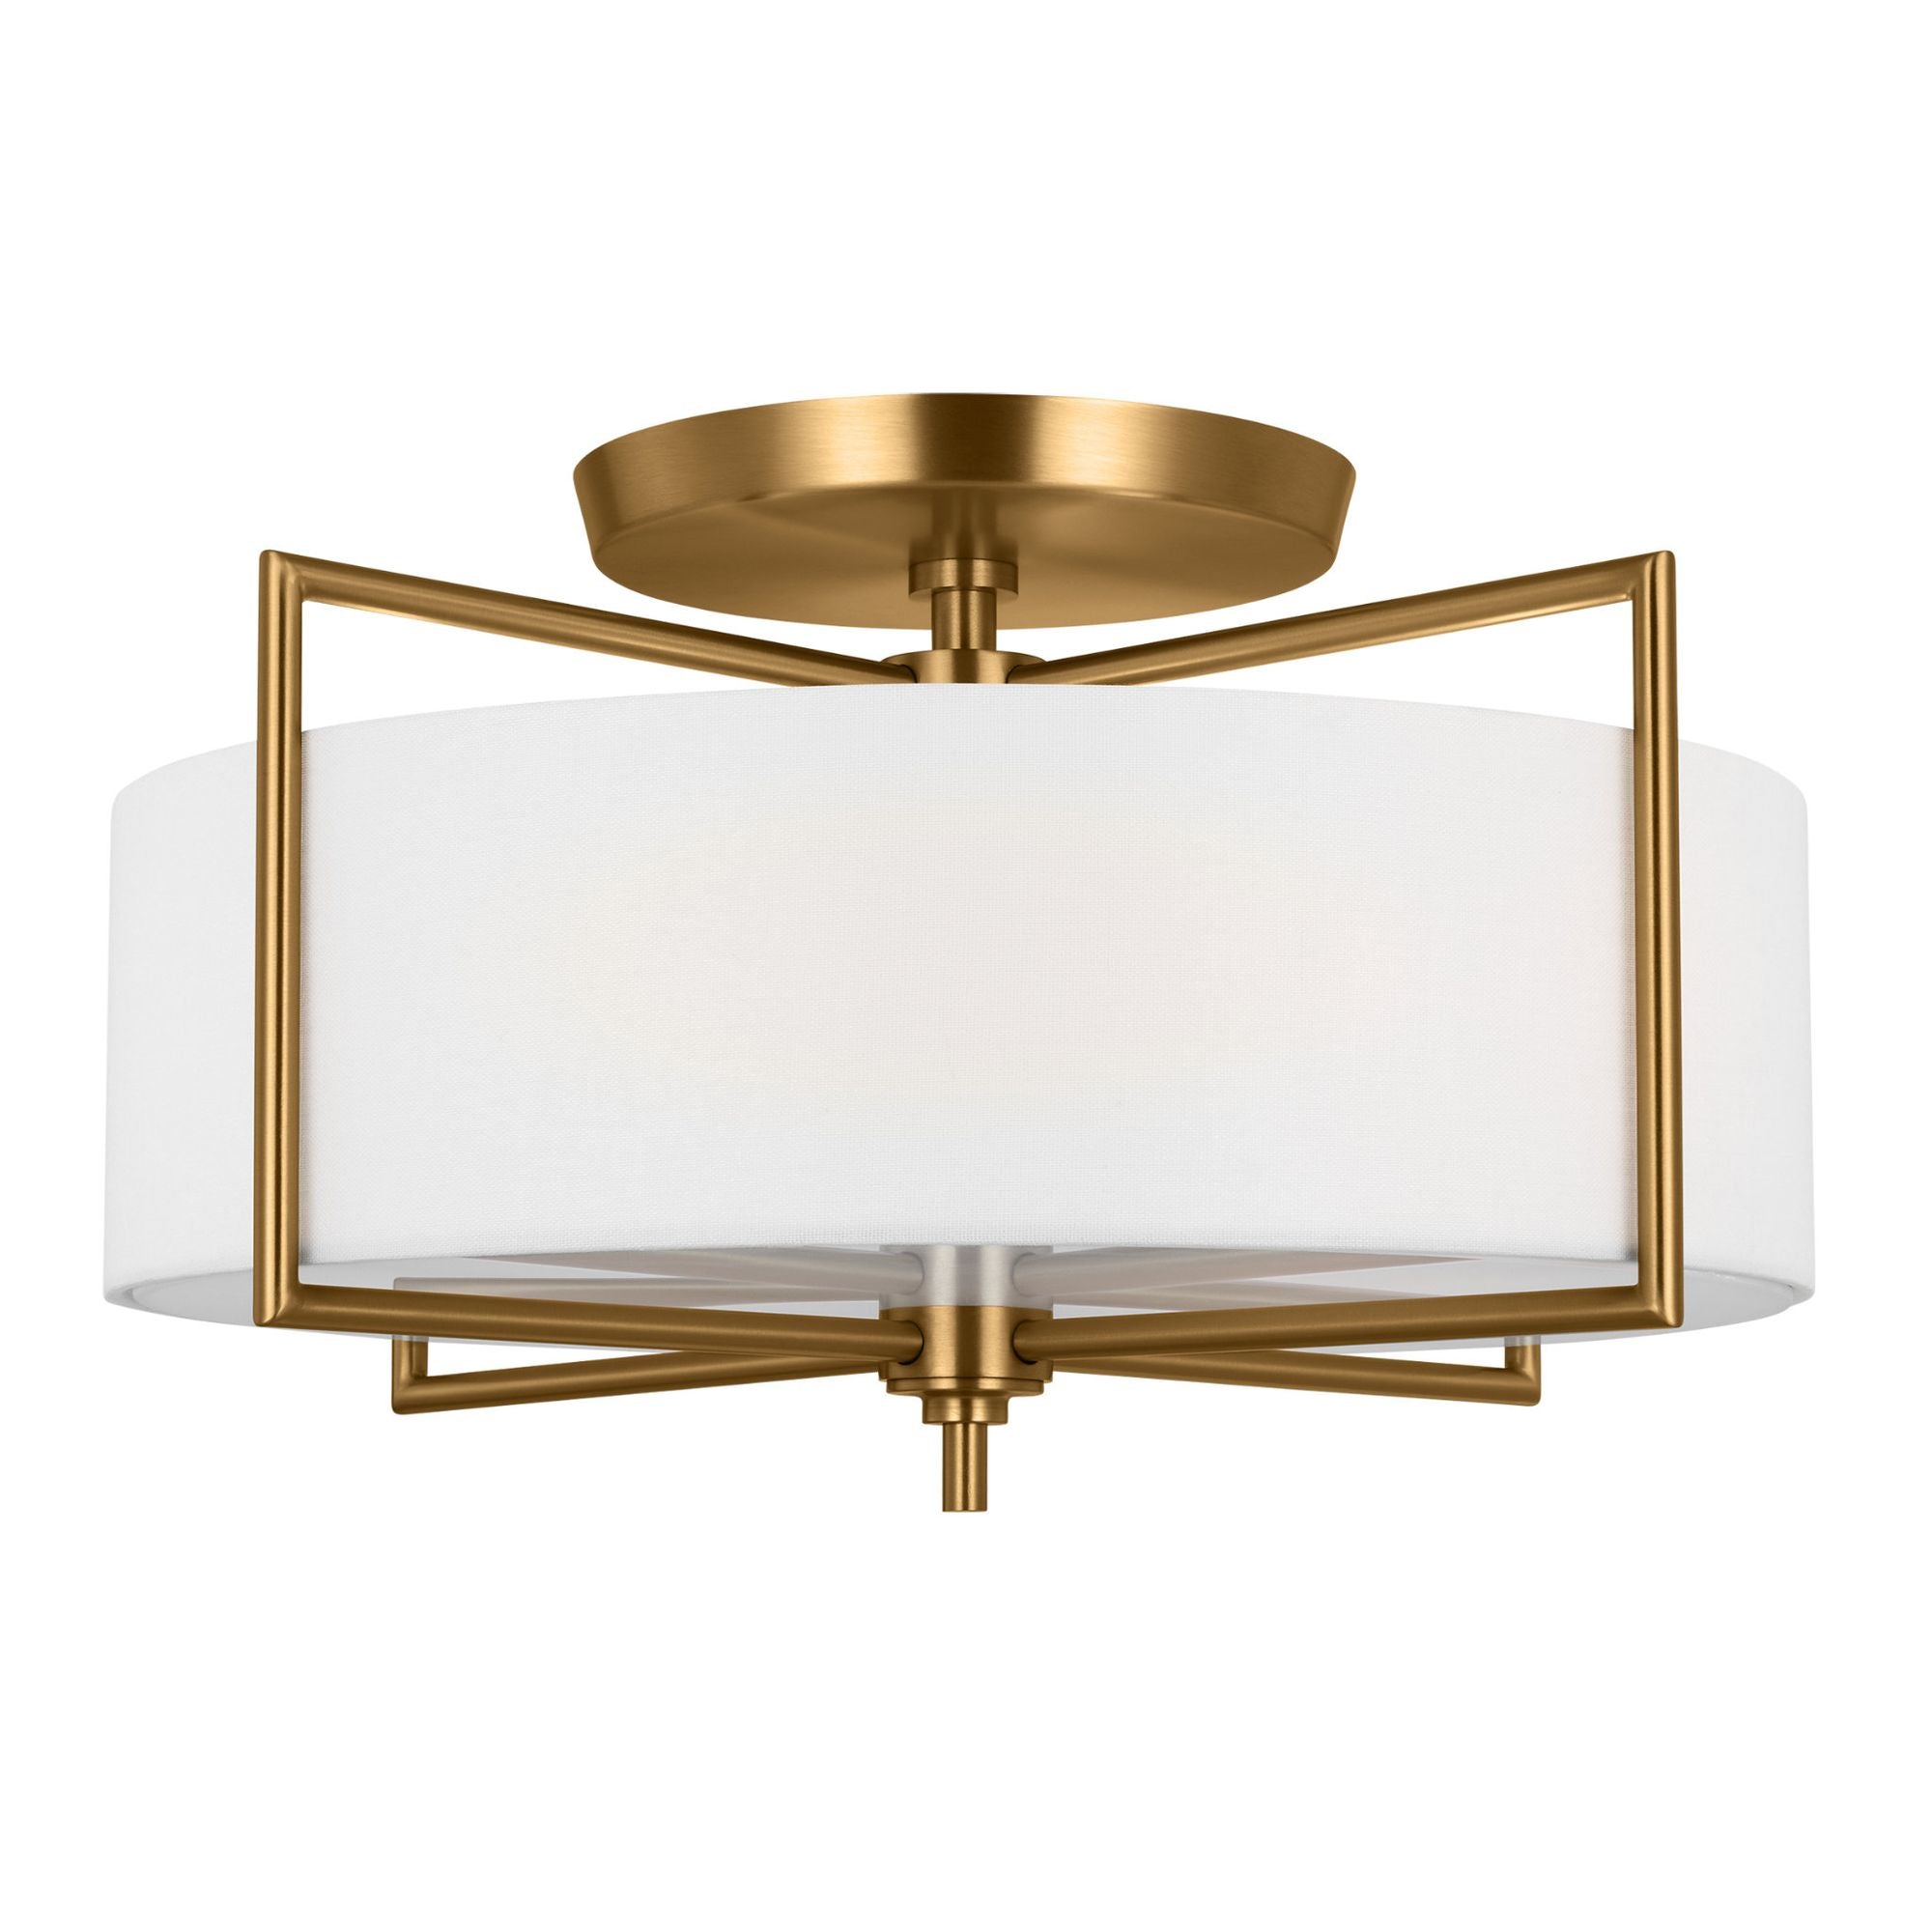 Chapman & Myers Perno Large Semi-Flush Mount in Burnished Brass